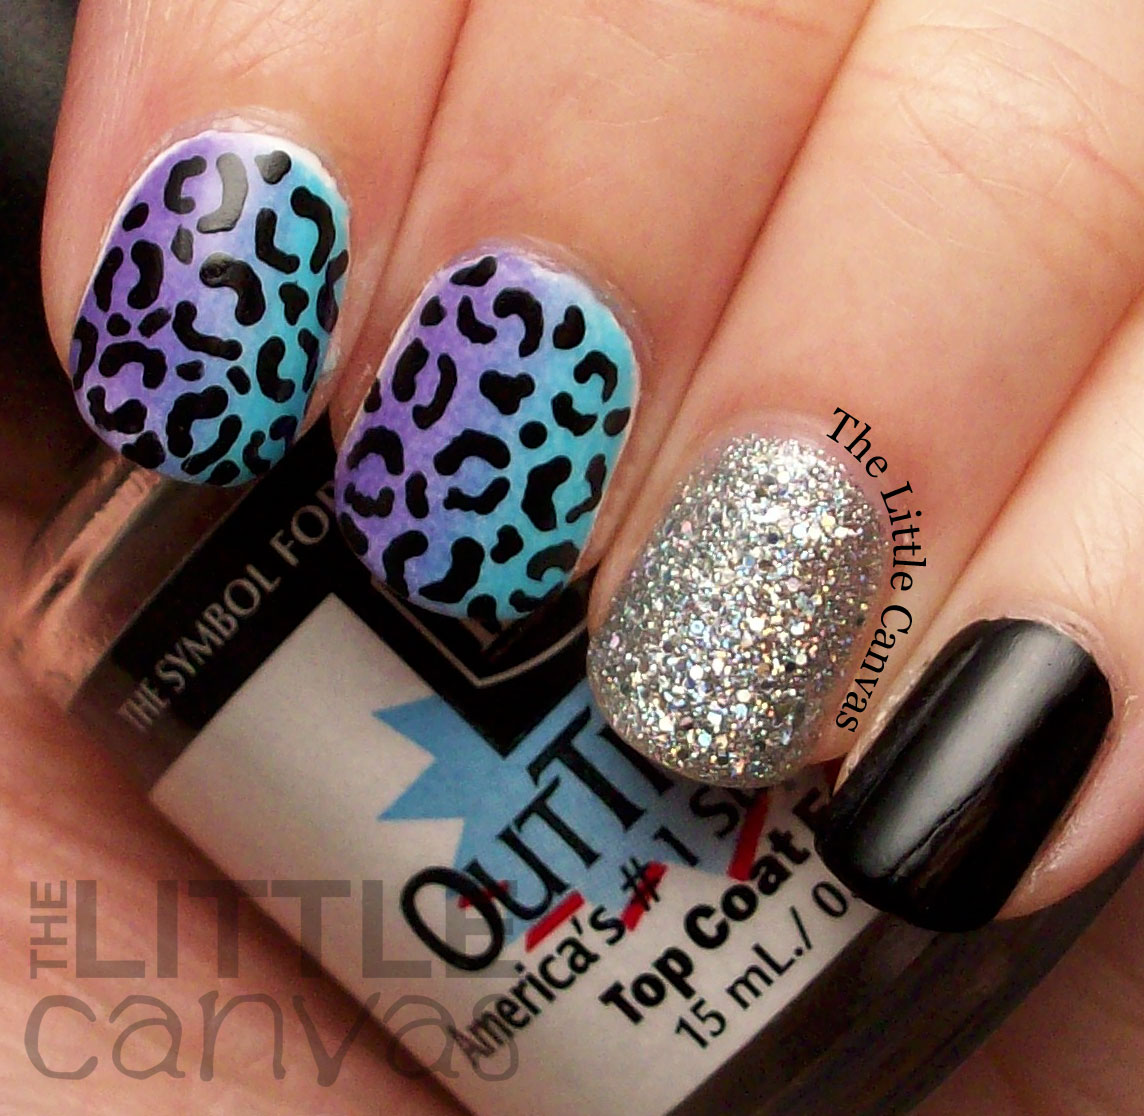 Leopard Print Mani Inspired by Properly Polished - The Little Canvas